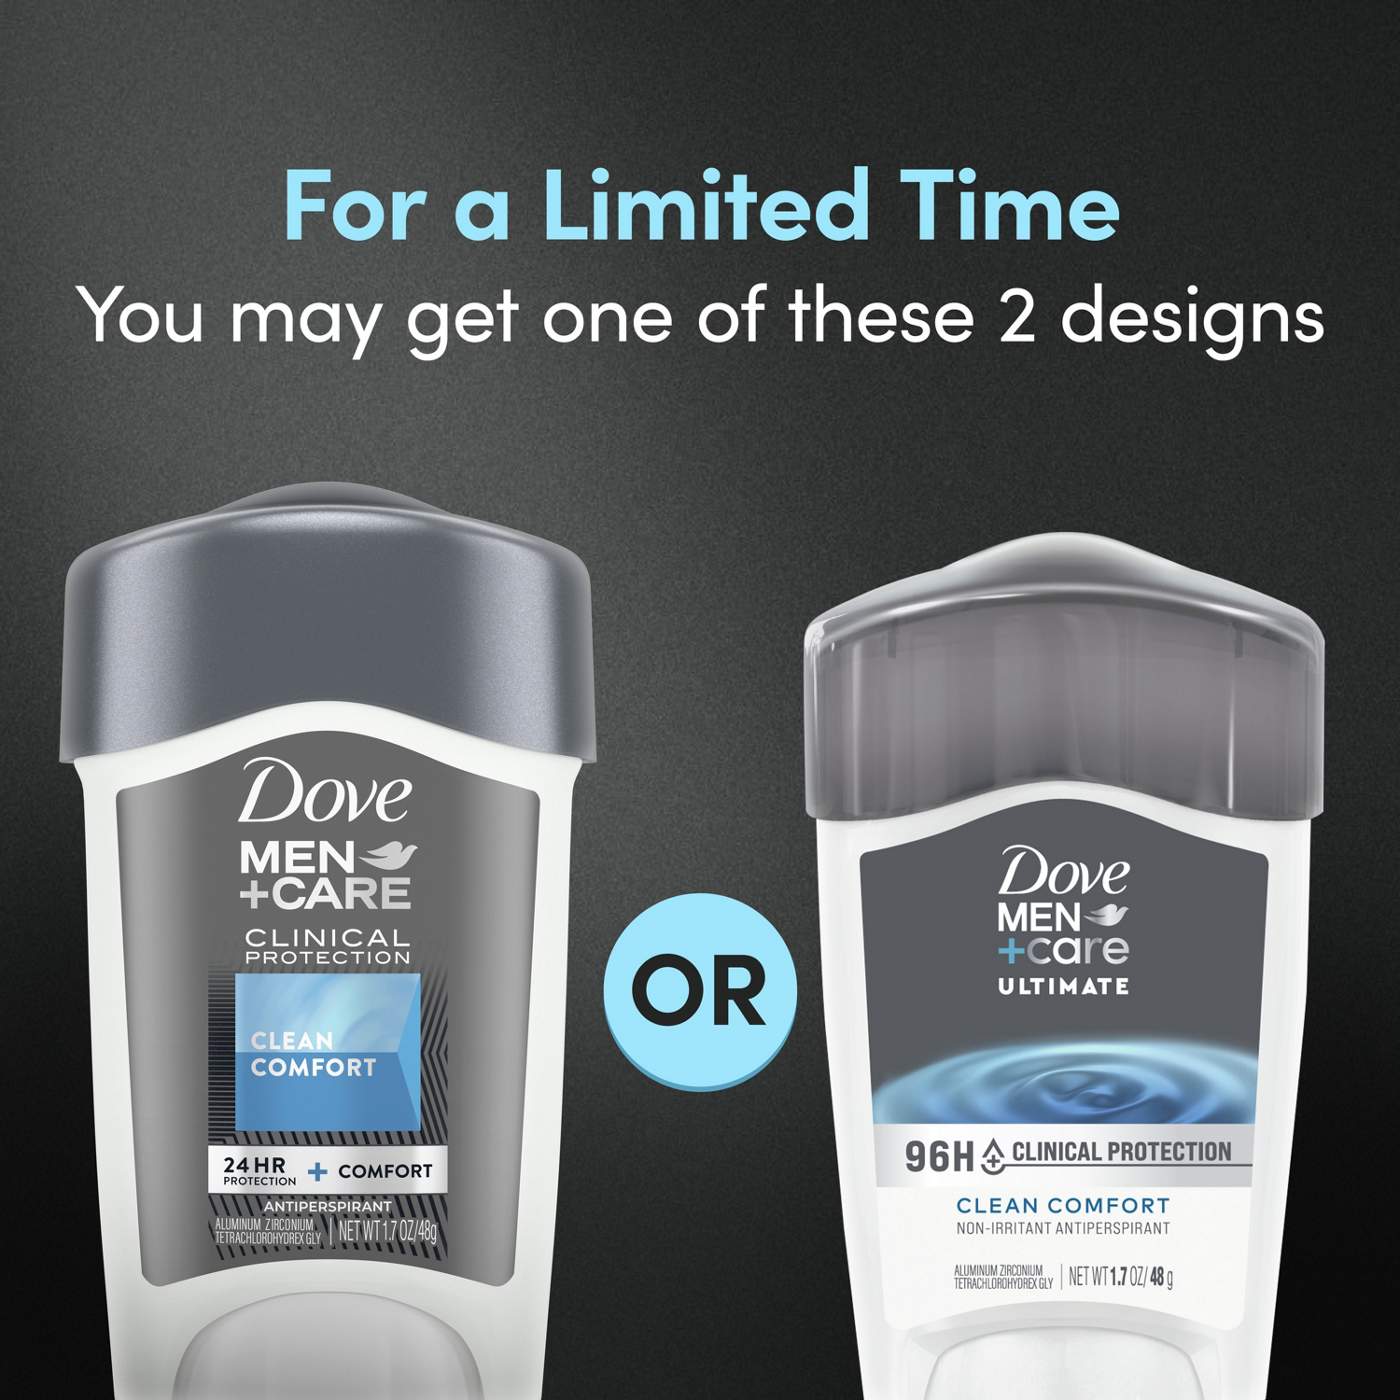 Dove Men+Care Clinical Protection Antiperspirant - Clean Comfort; image 5 of 7